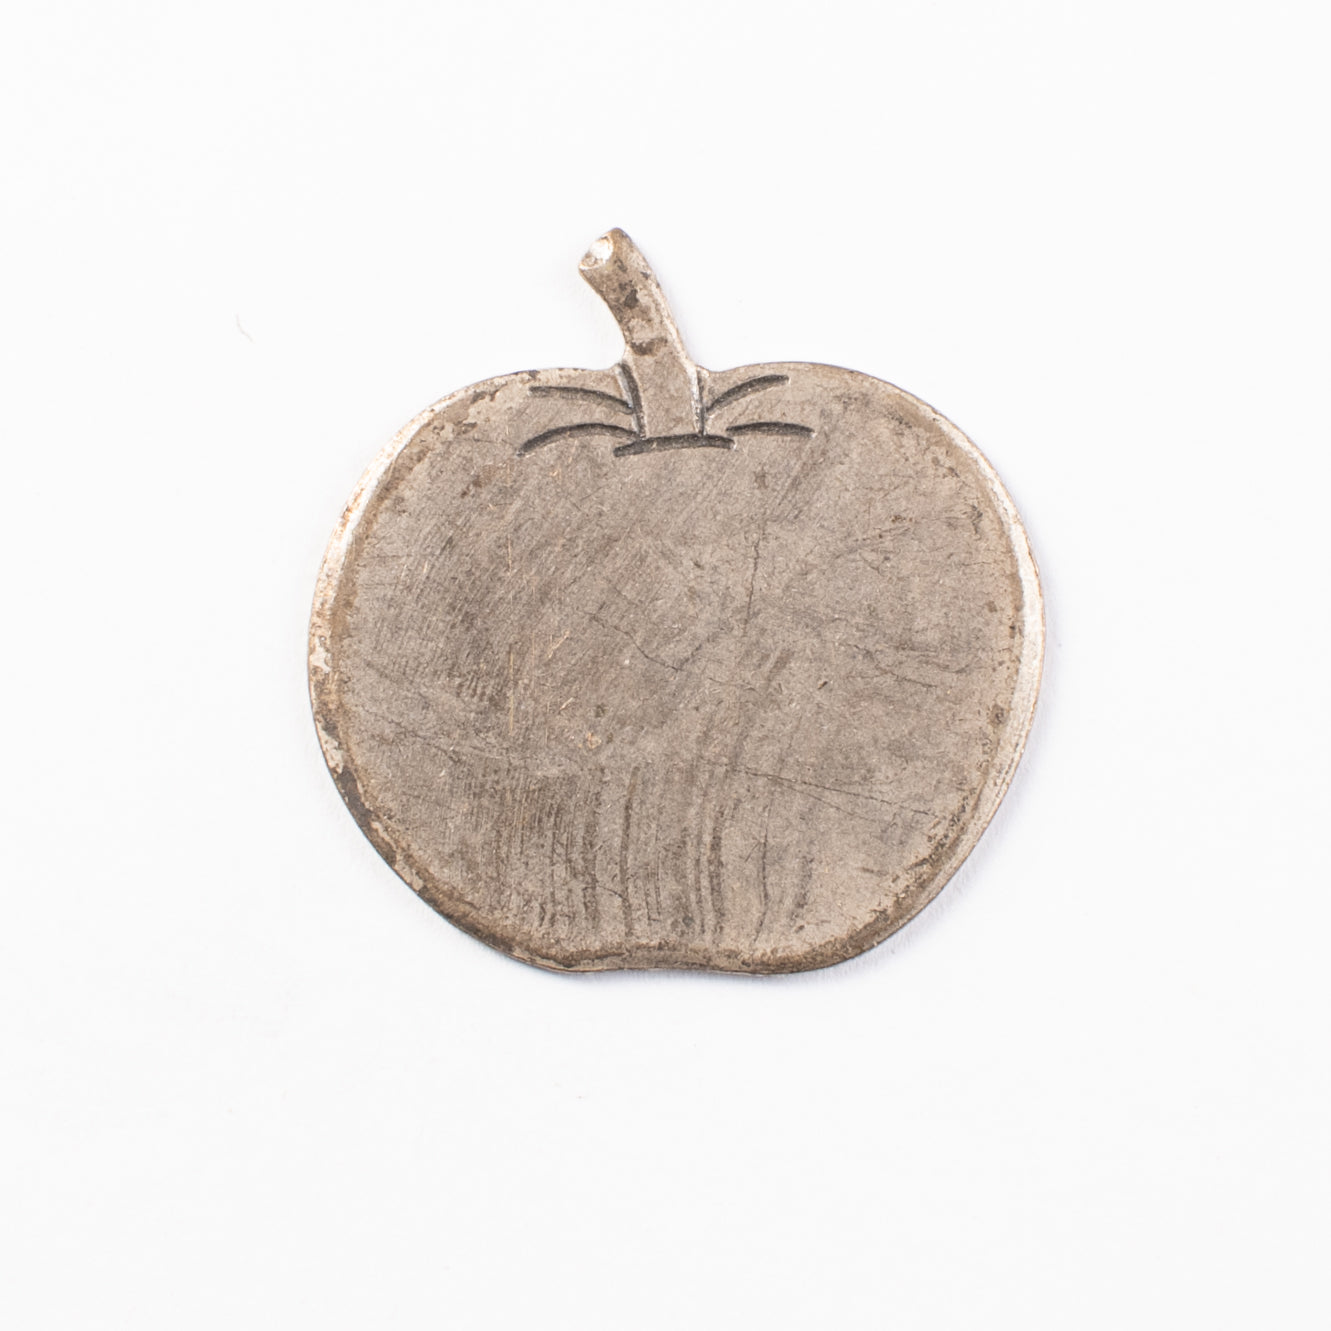 33x35mm Apple/Tomato Charm, Antique Silver, Brass Stamping, pk/6